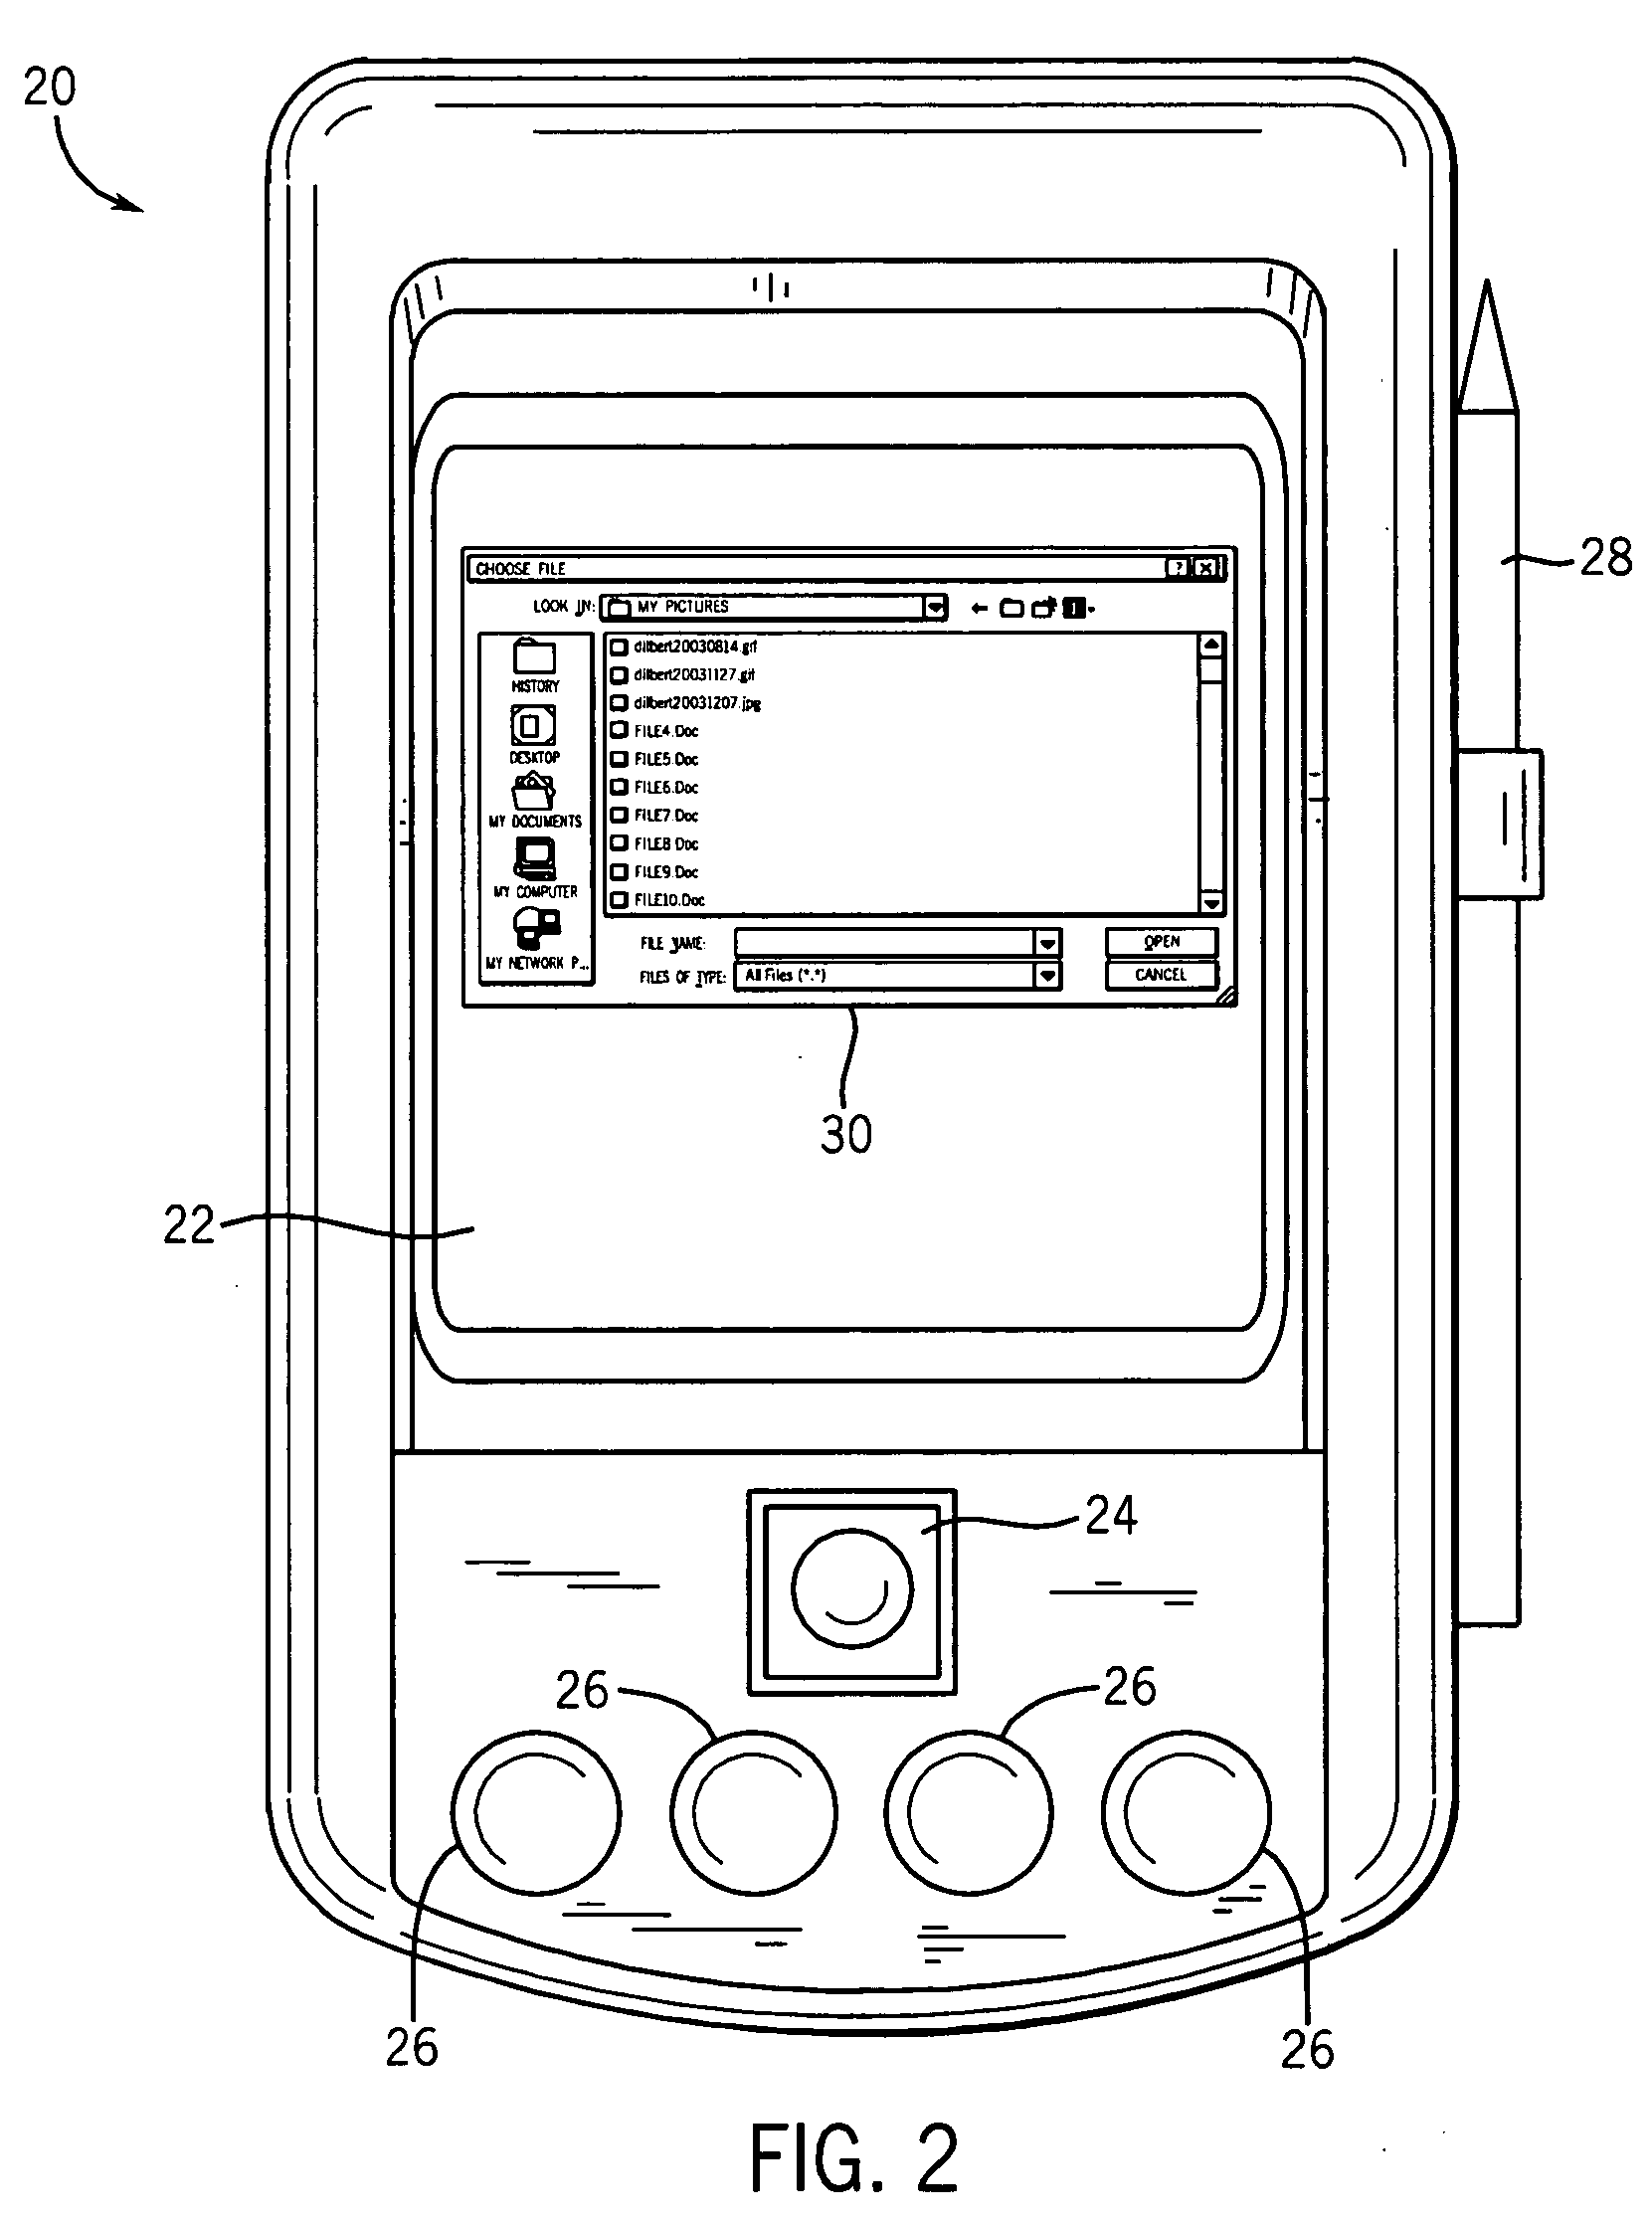 User input system and method for selecting a file